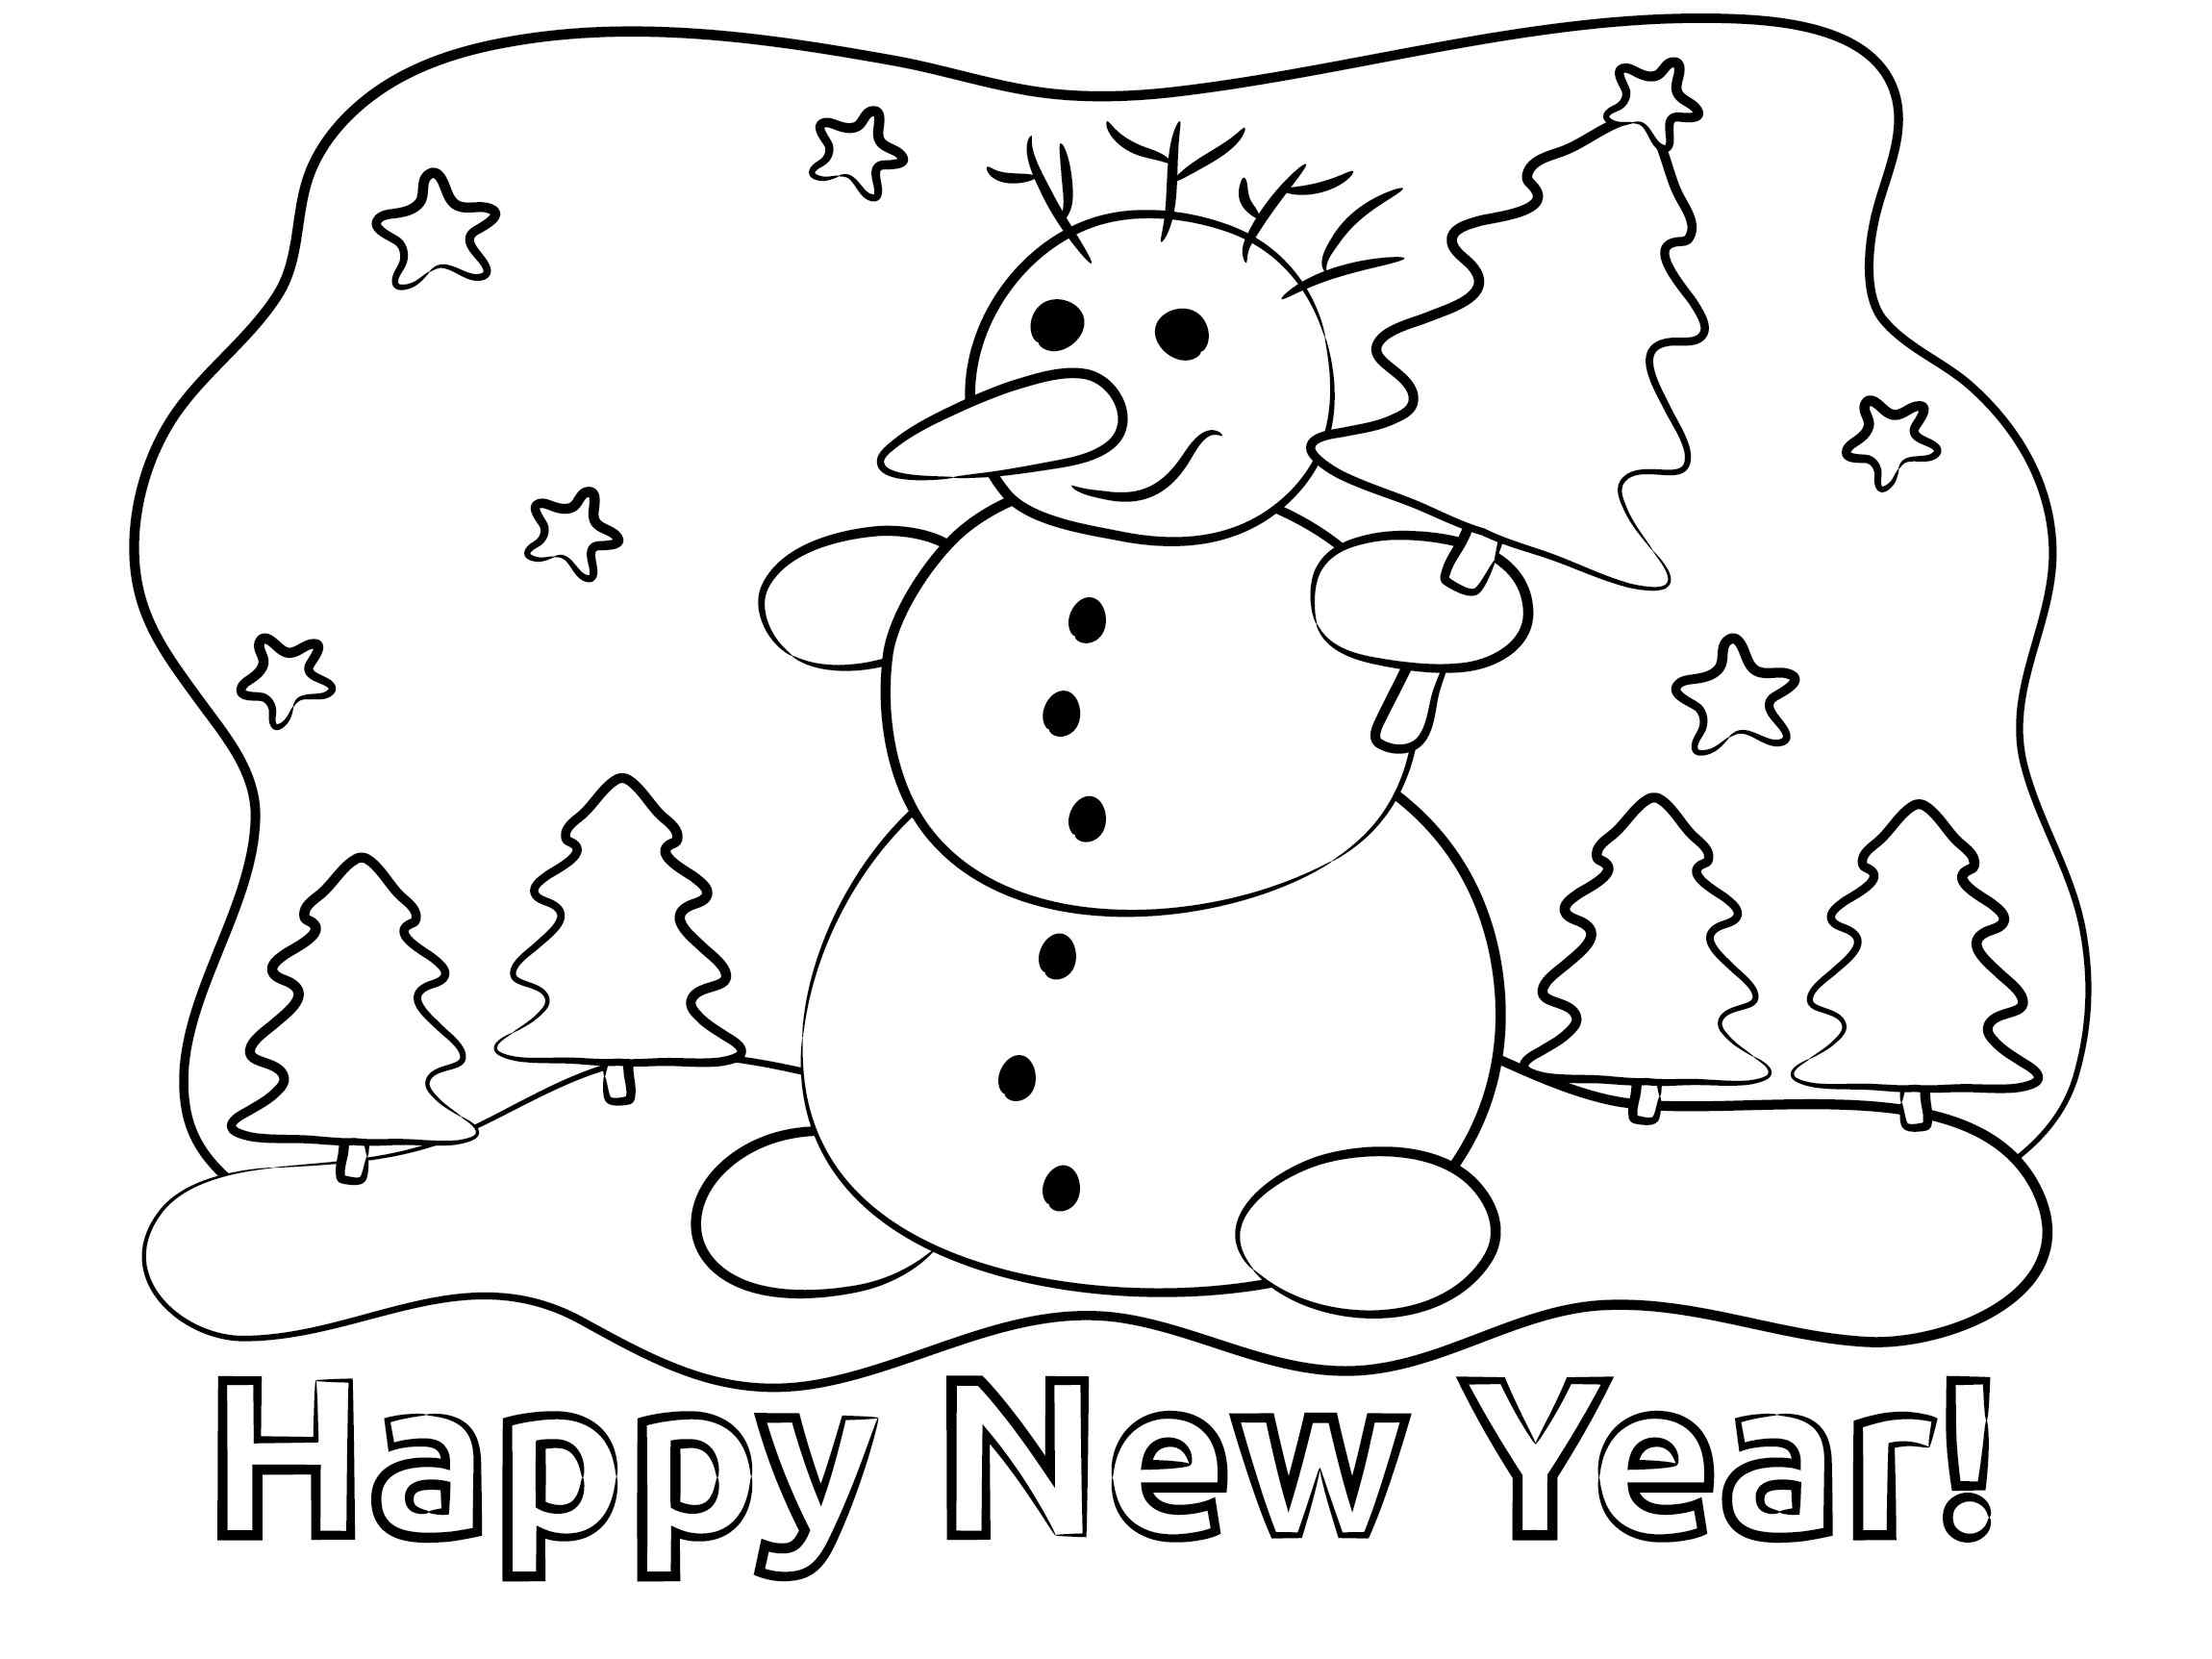 Olaf In New Year Coloring Page